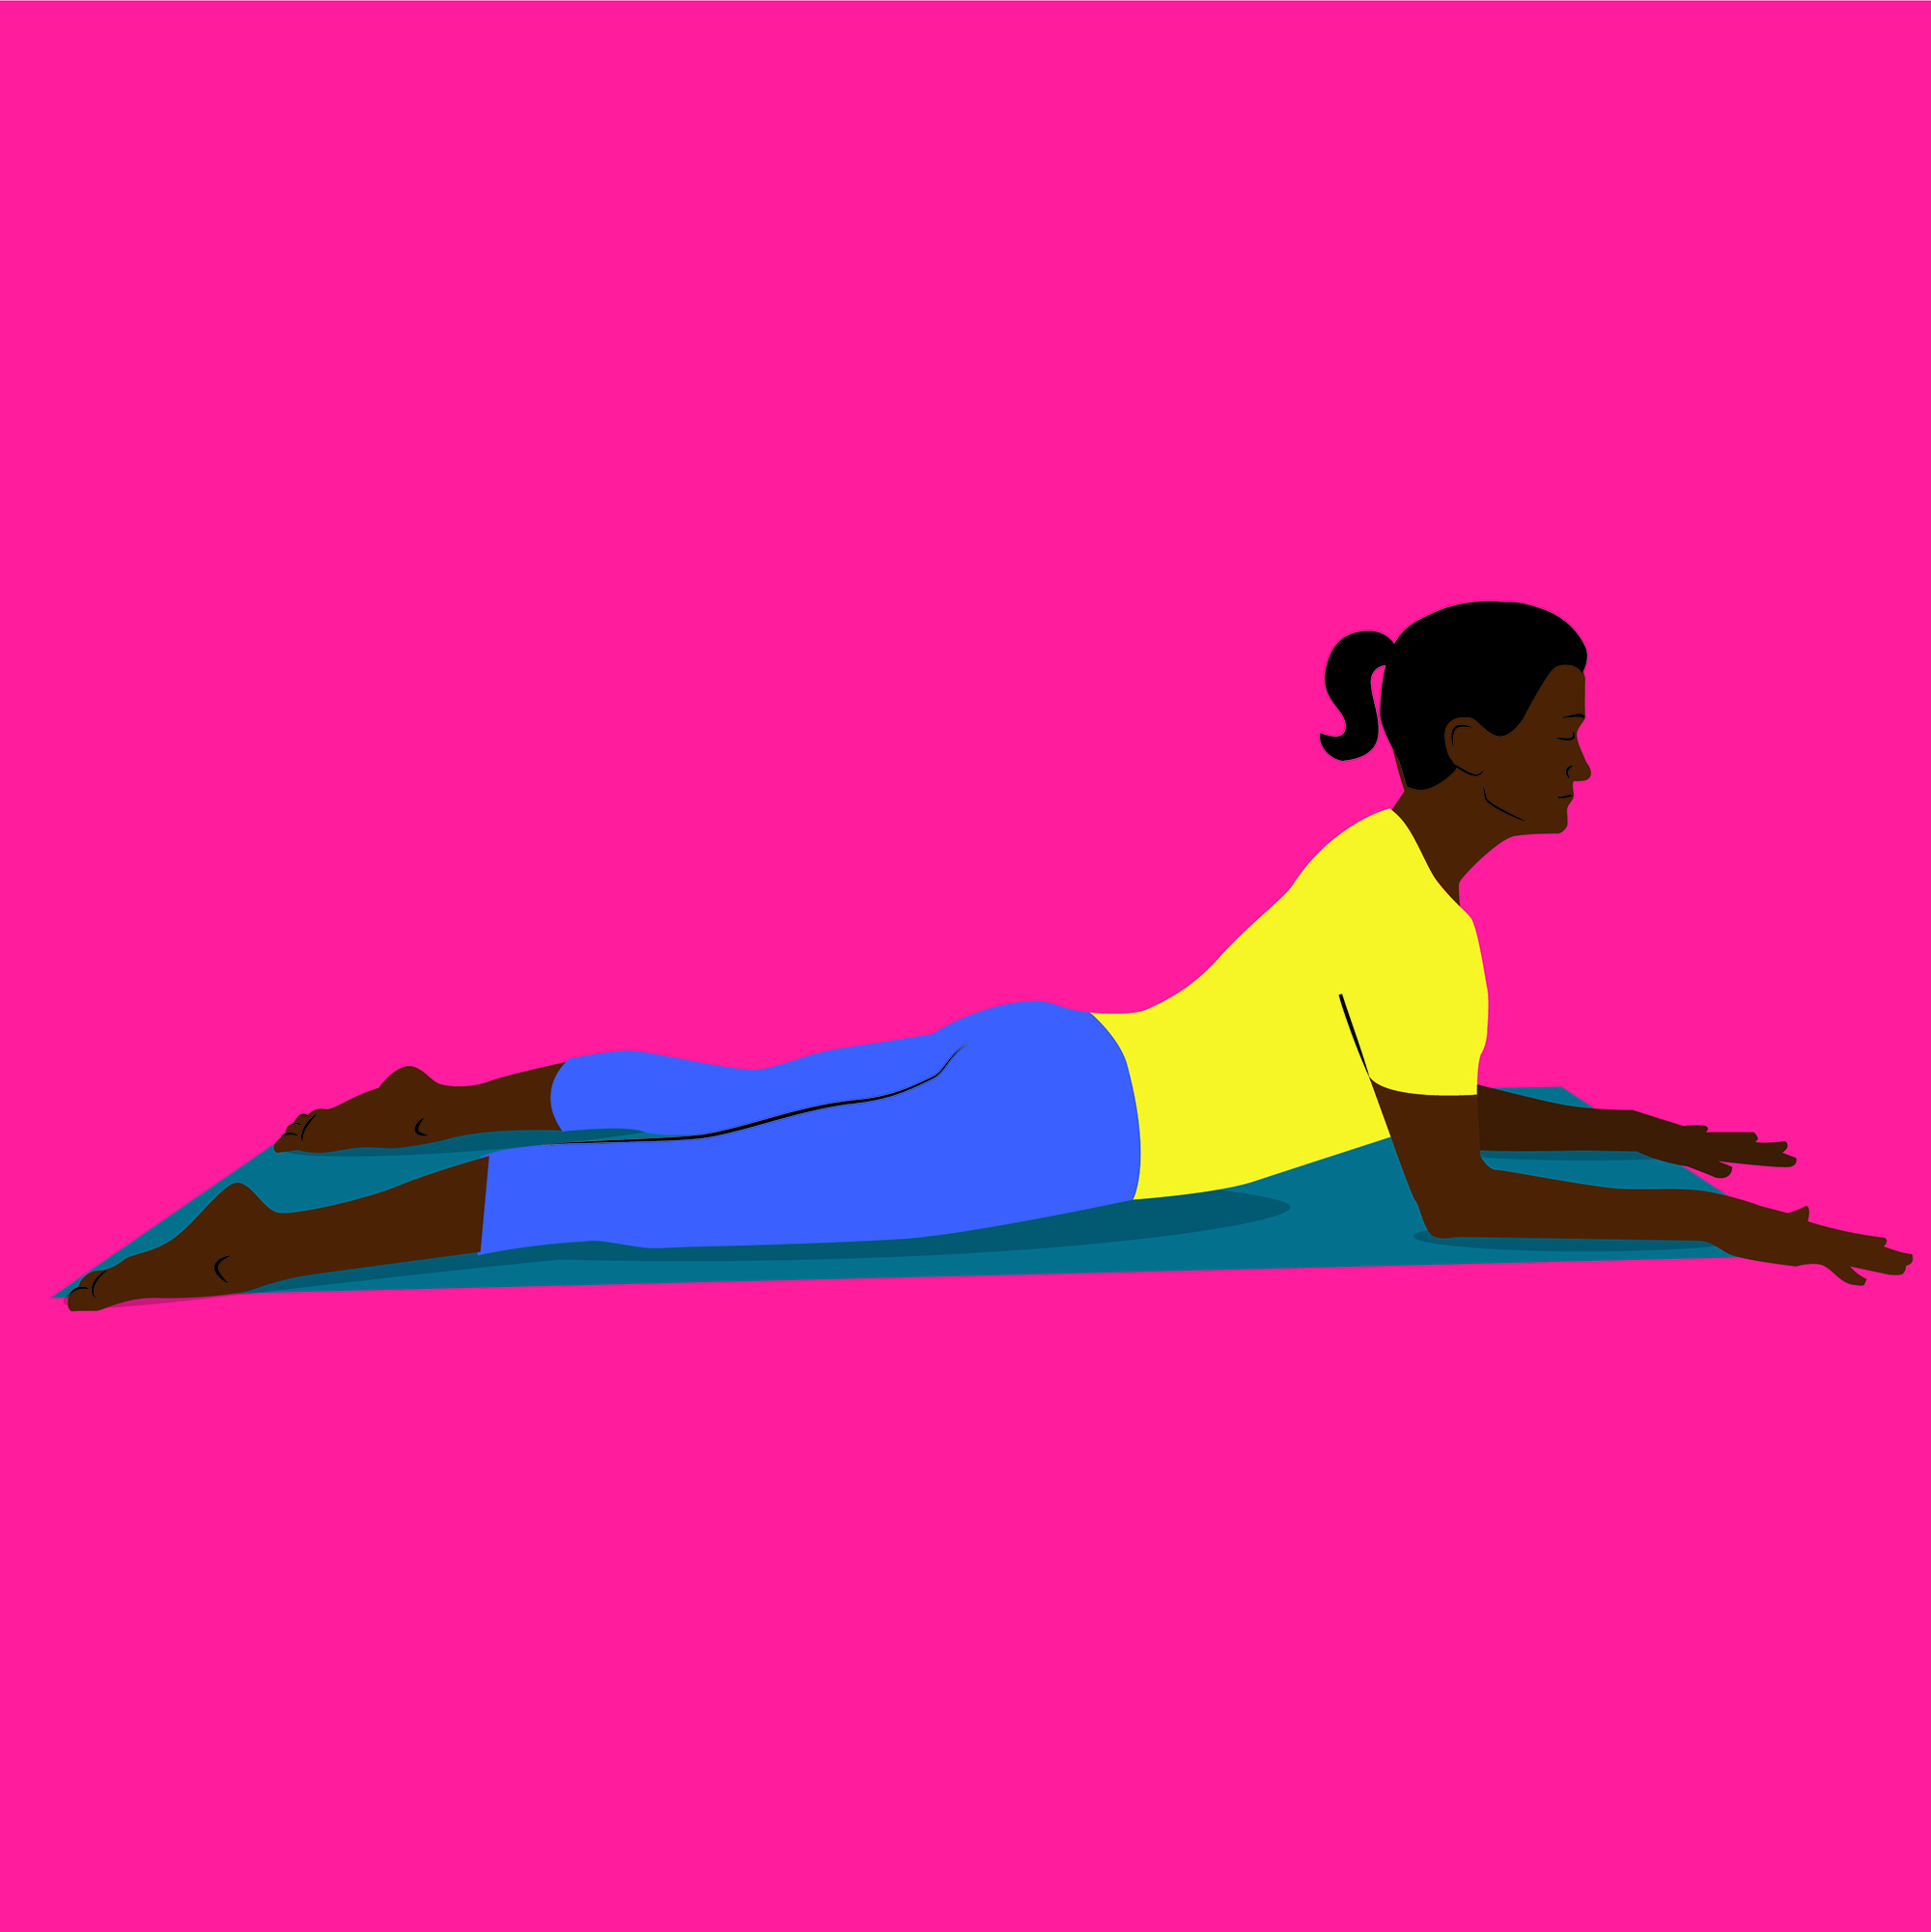 A Yoga Sequence to Help Relieve Menstrual Cramps (INFOGRAPHIC)